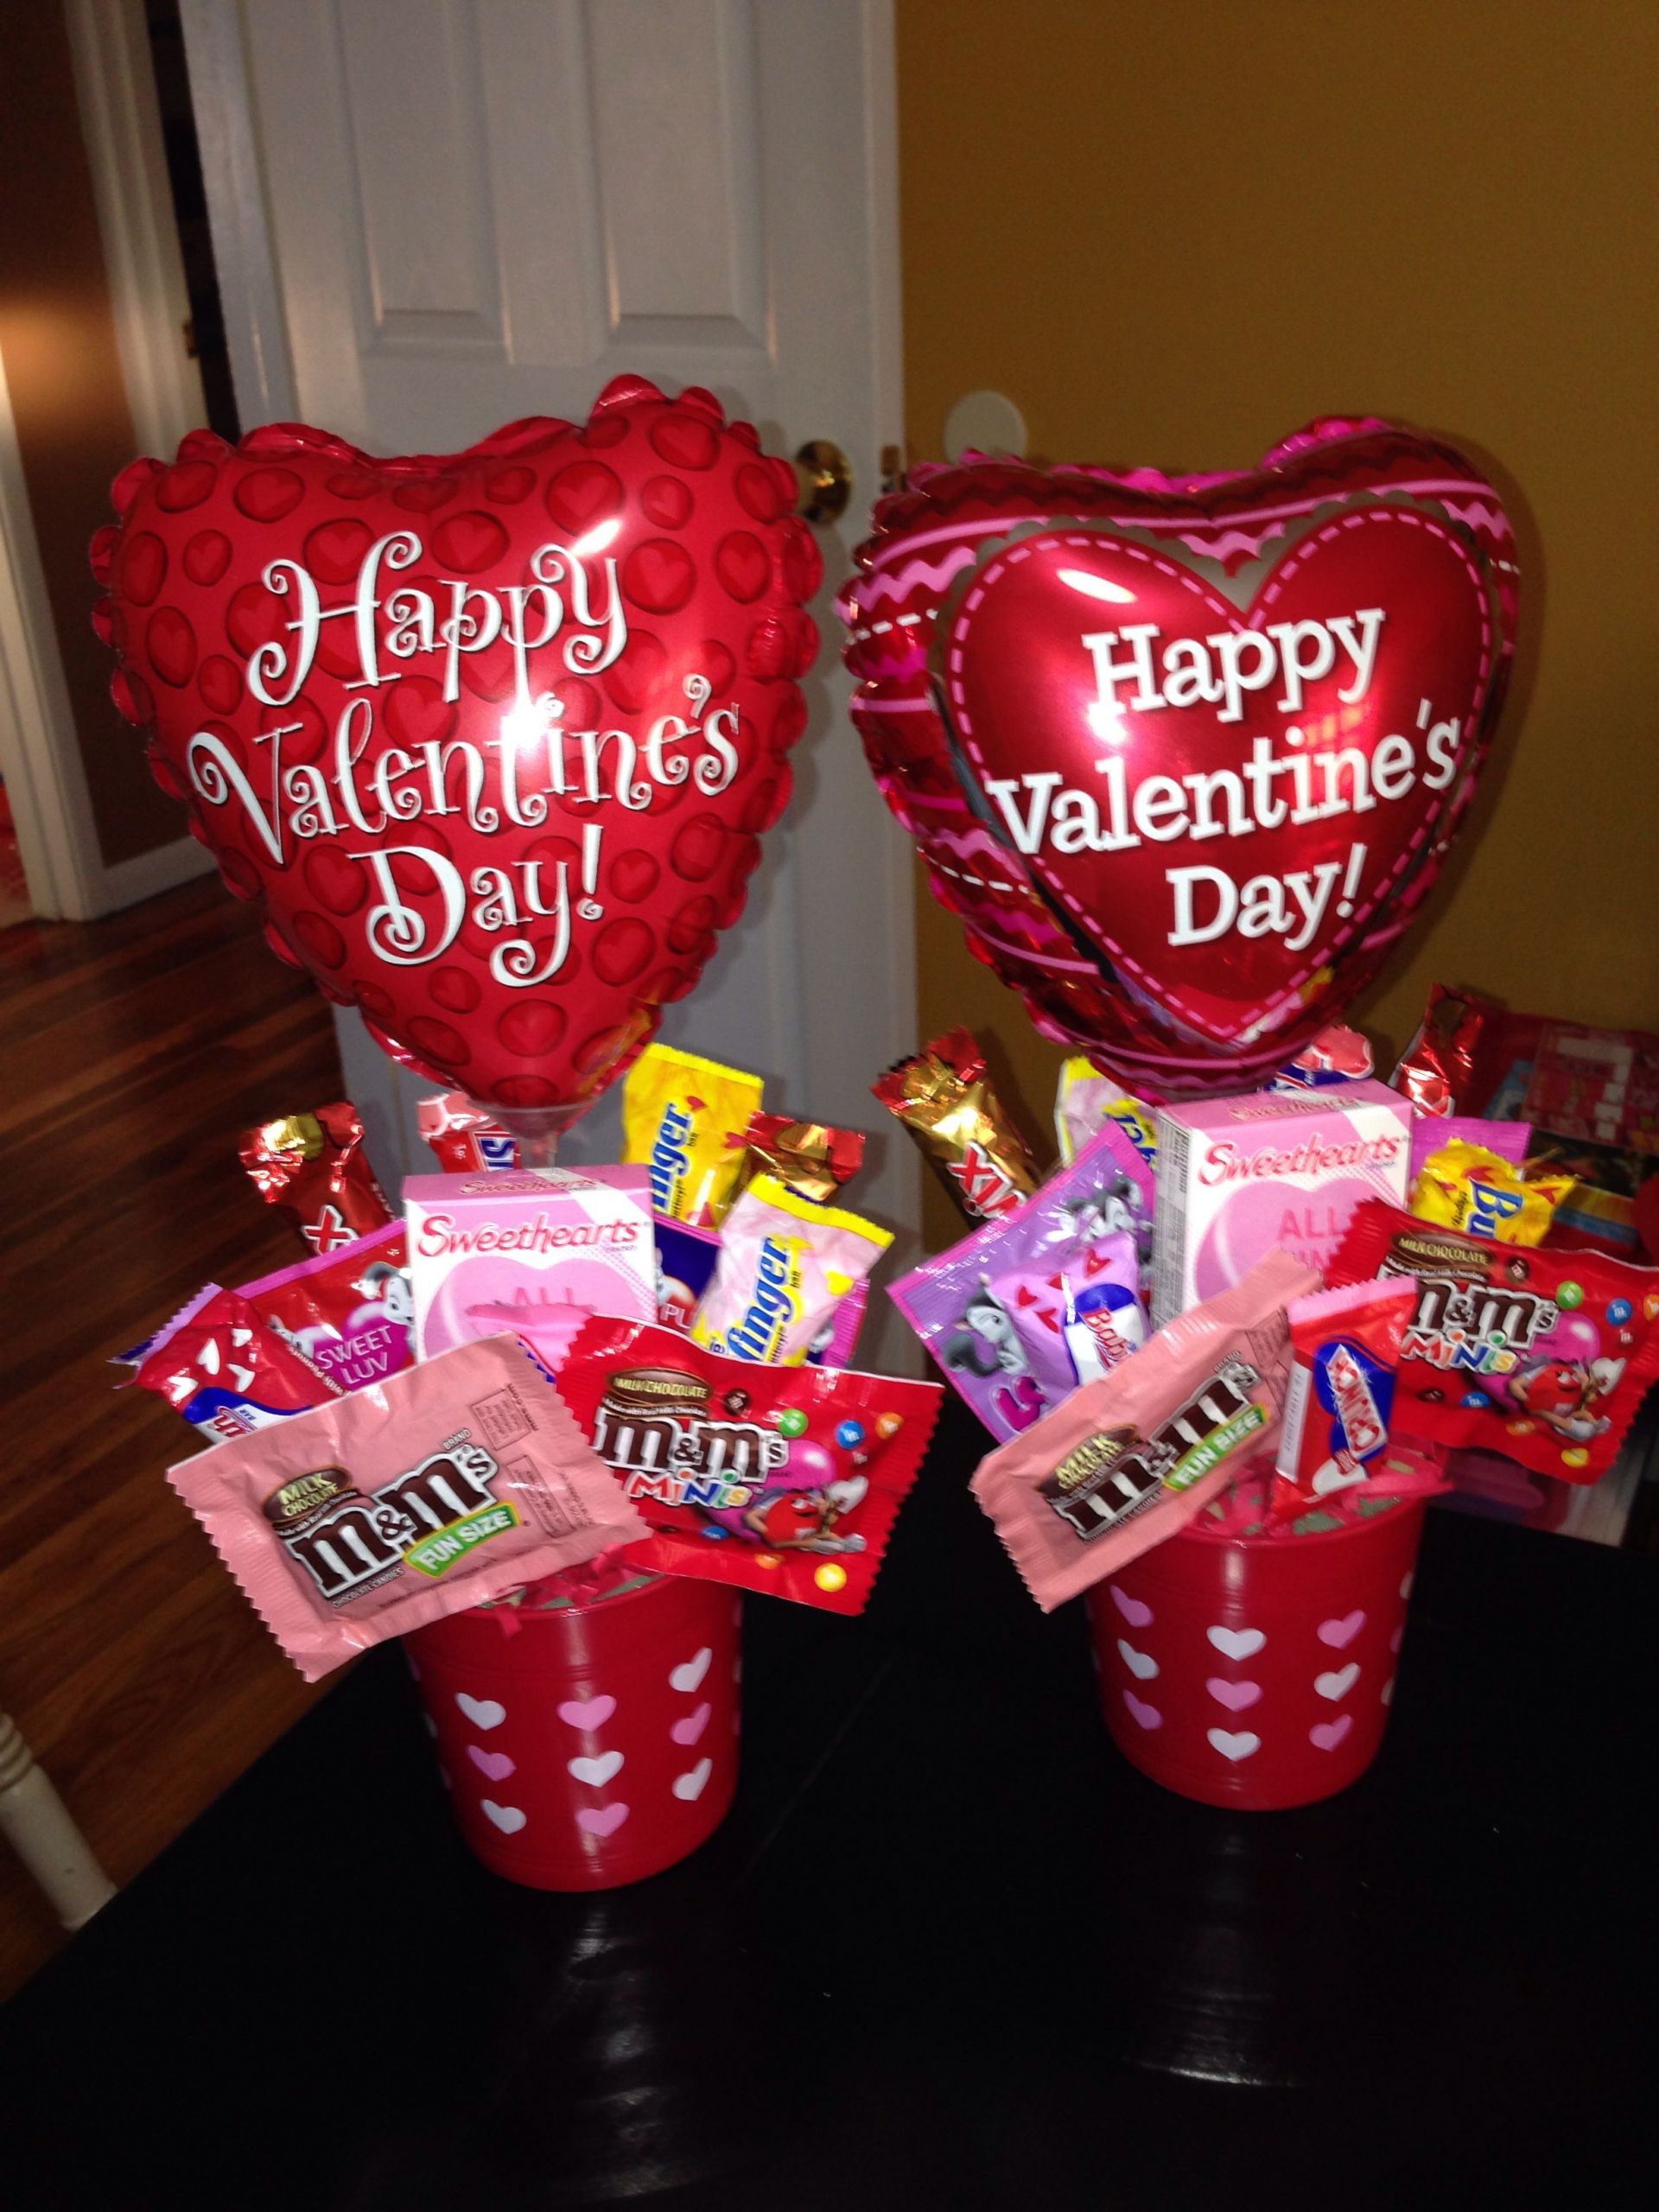 Valentines Gift Ideas For Friends
 Small valentines bouquets